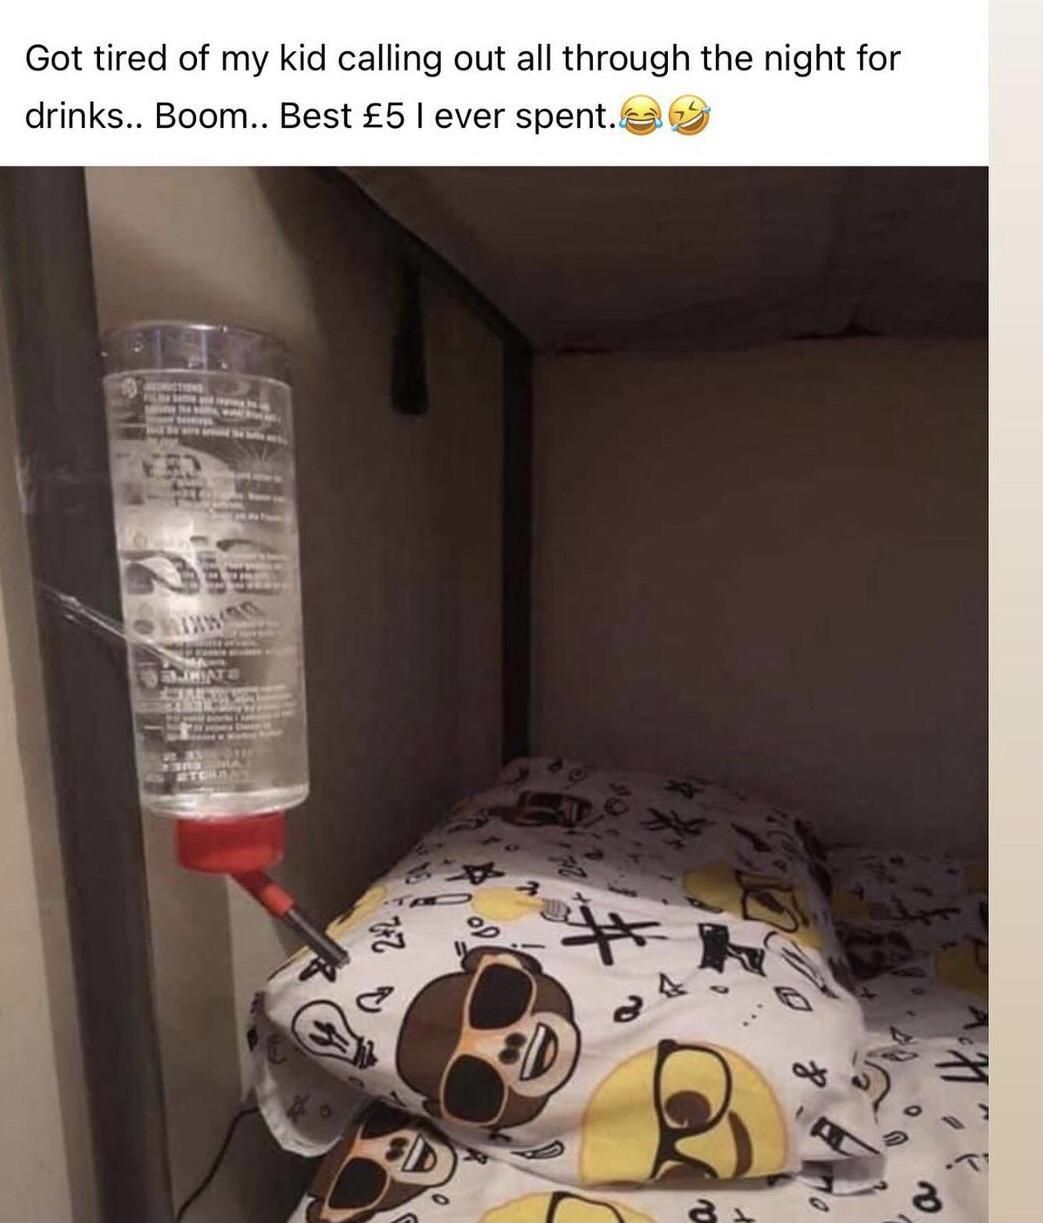 Night time parenting sorted!